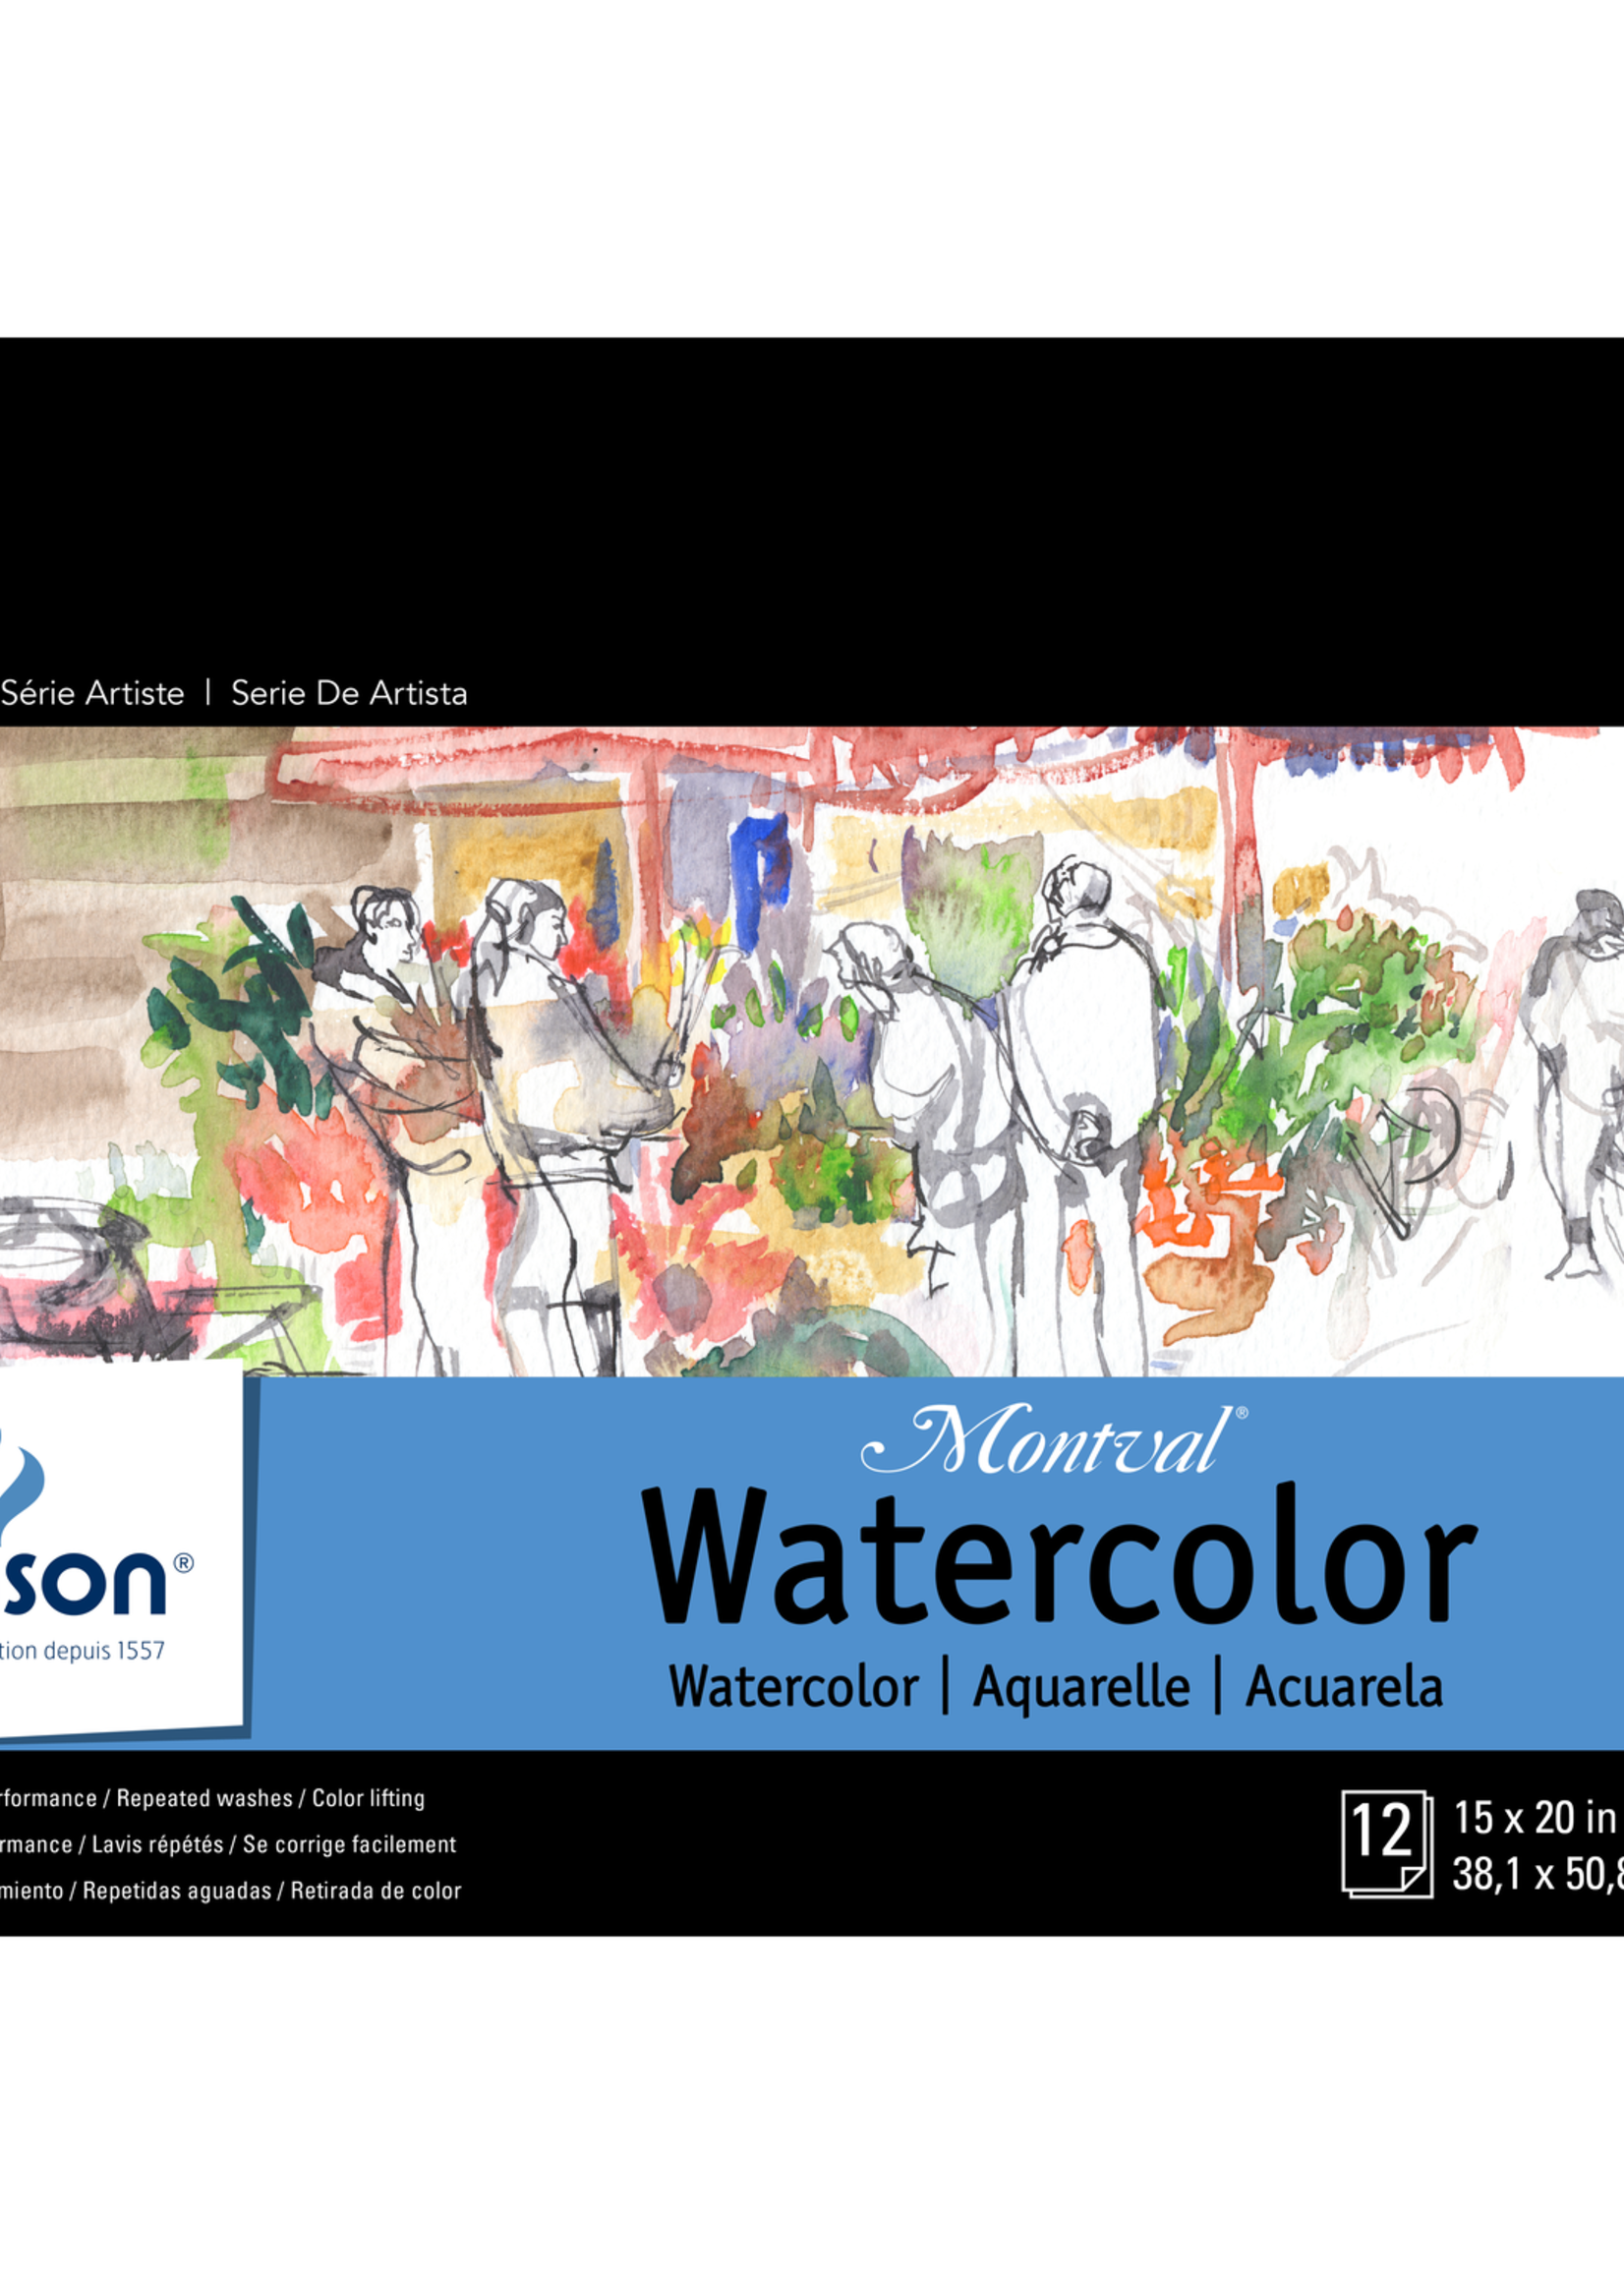 CANSON / PACON PAPERS MONTVAL - WATERCOLOR COLD PRESS 140LB  -